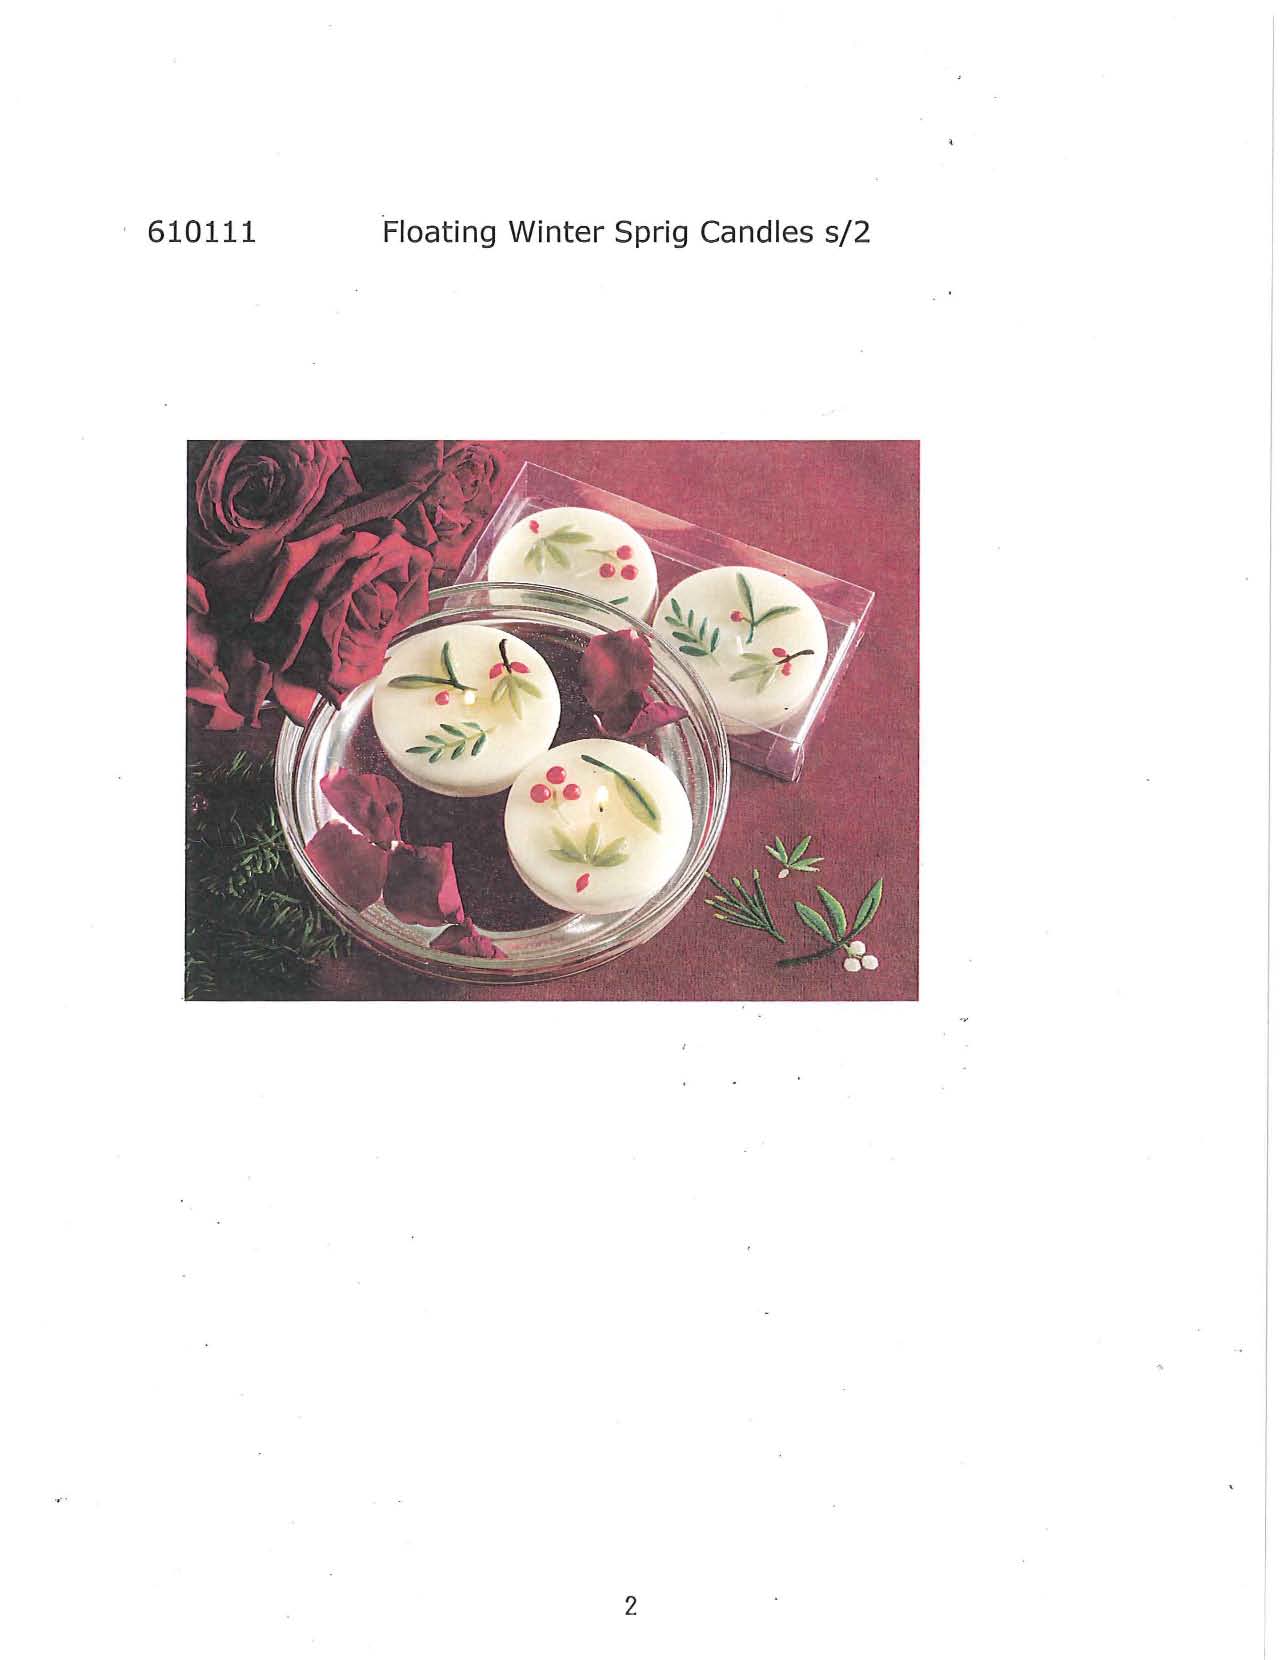 Floating Winter Sprig Candle s/2